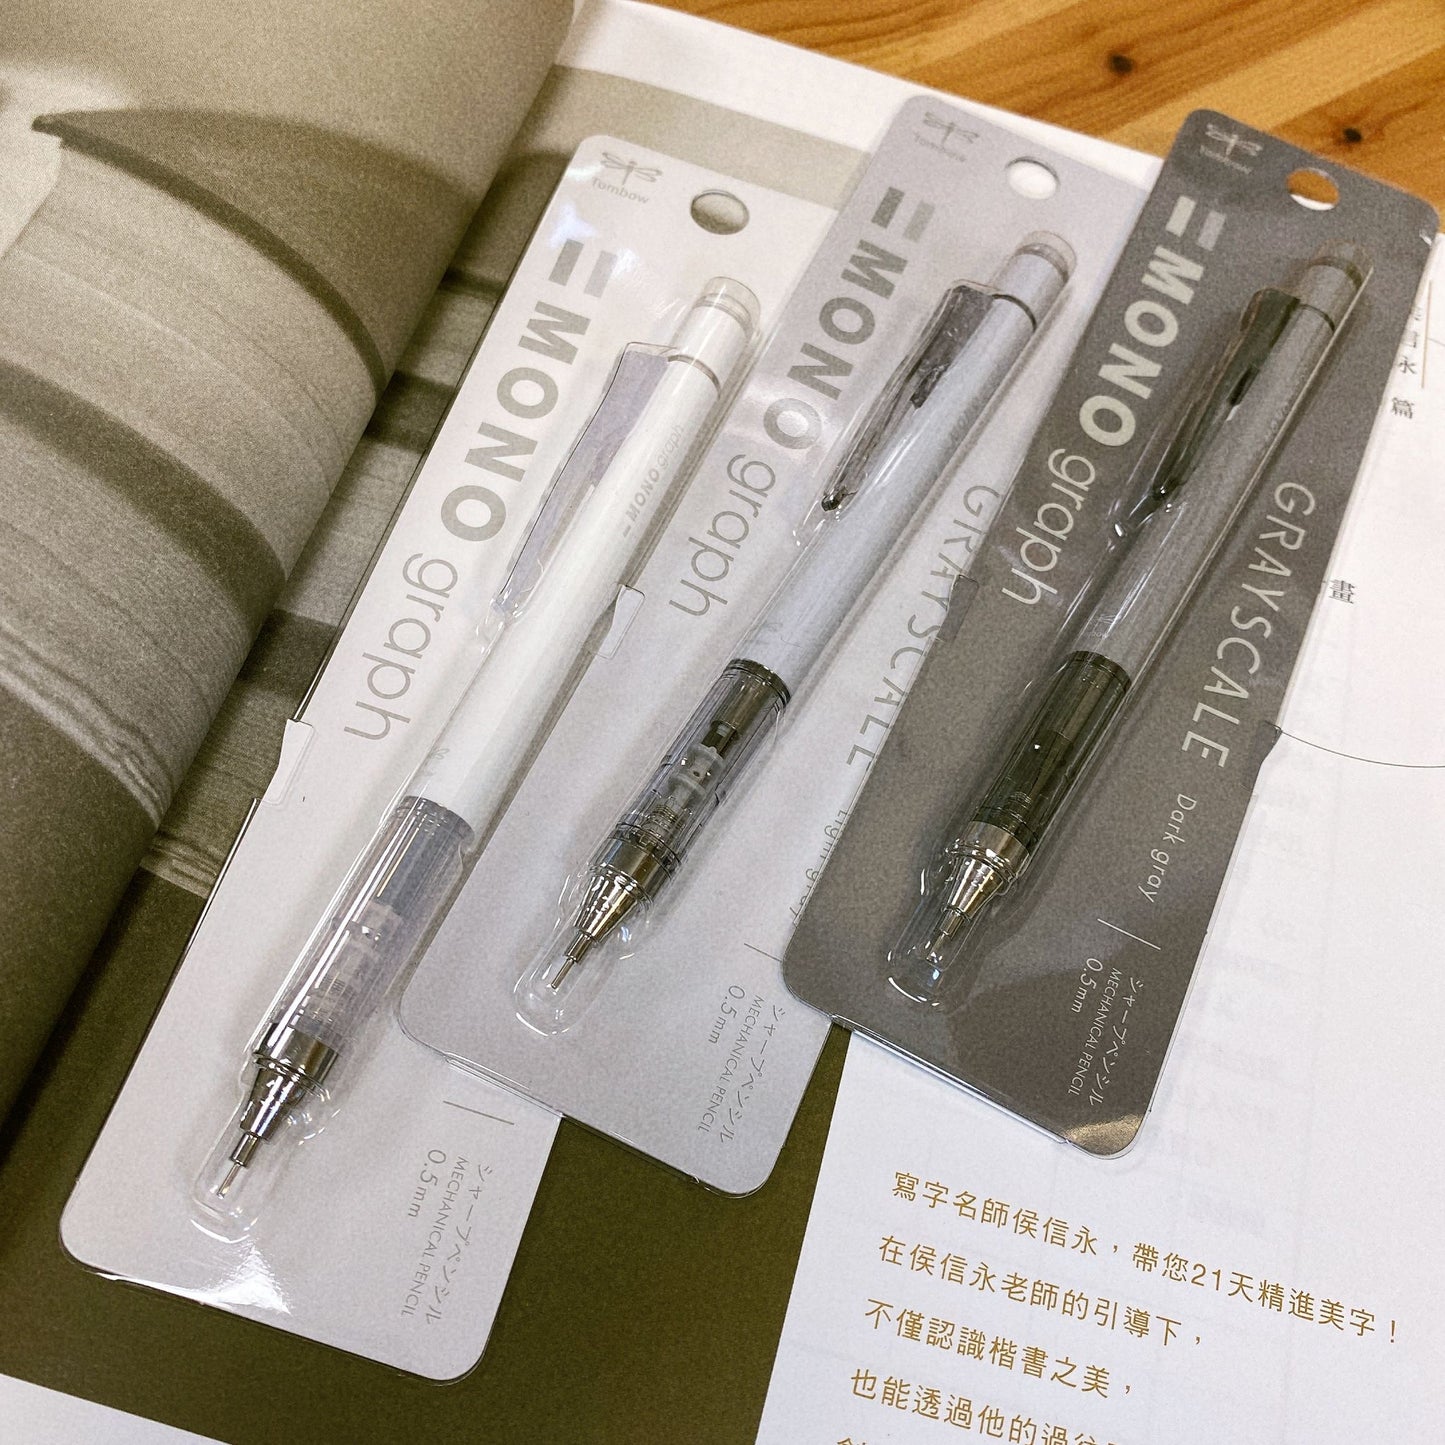 Tombow Mono Color 鉛芯筆 - The Grey Scale